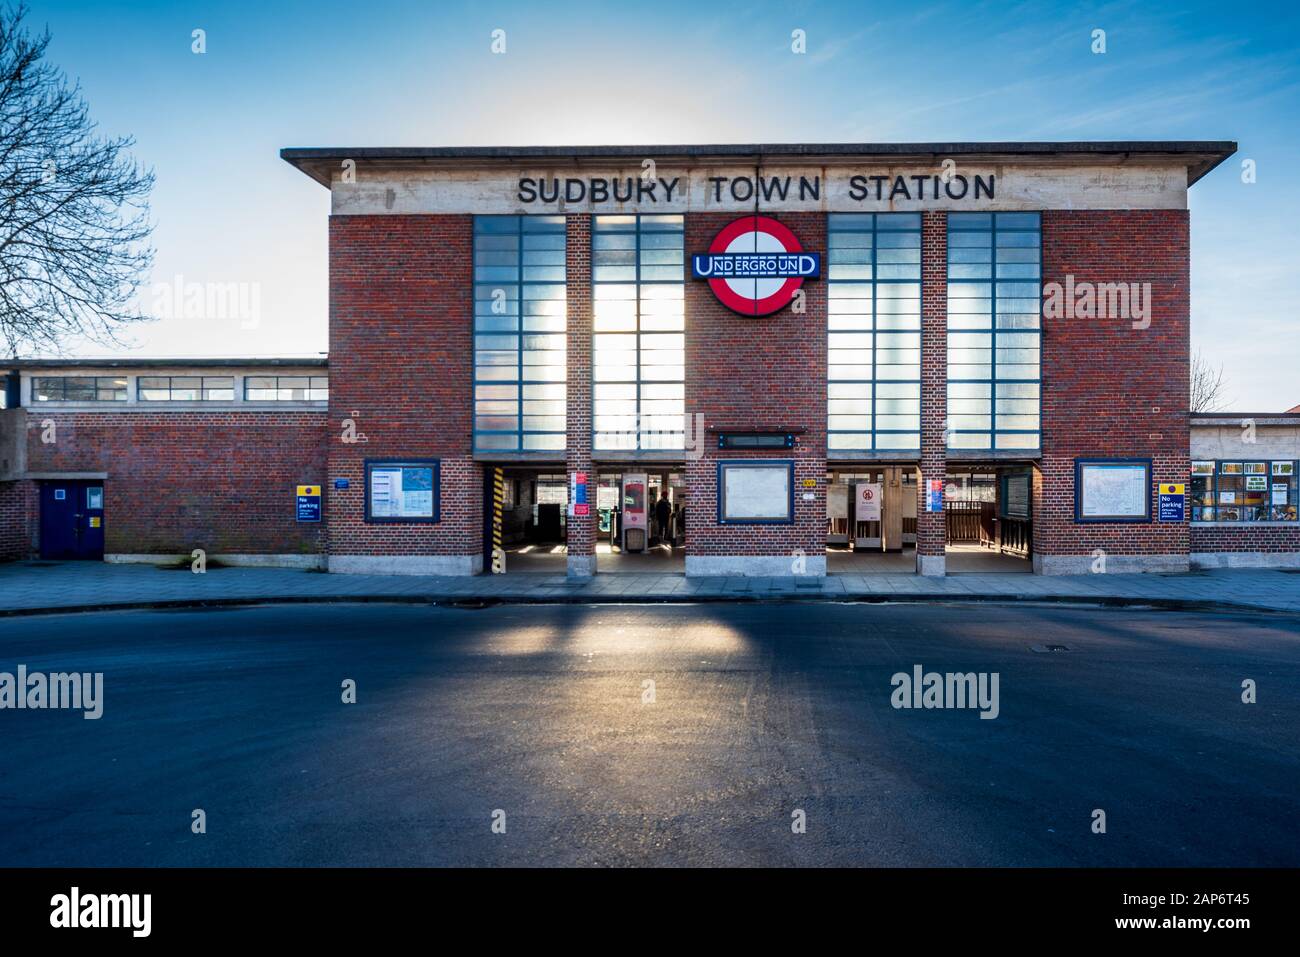 Sudbury Town Tube Station London. London Underground Piccadilly Line station designed by Charles Holden in a modern European style. 1931. Grade II. Stock Photo